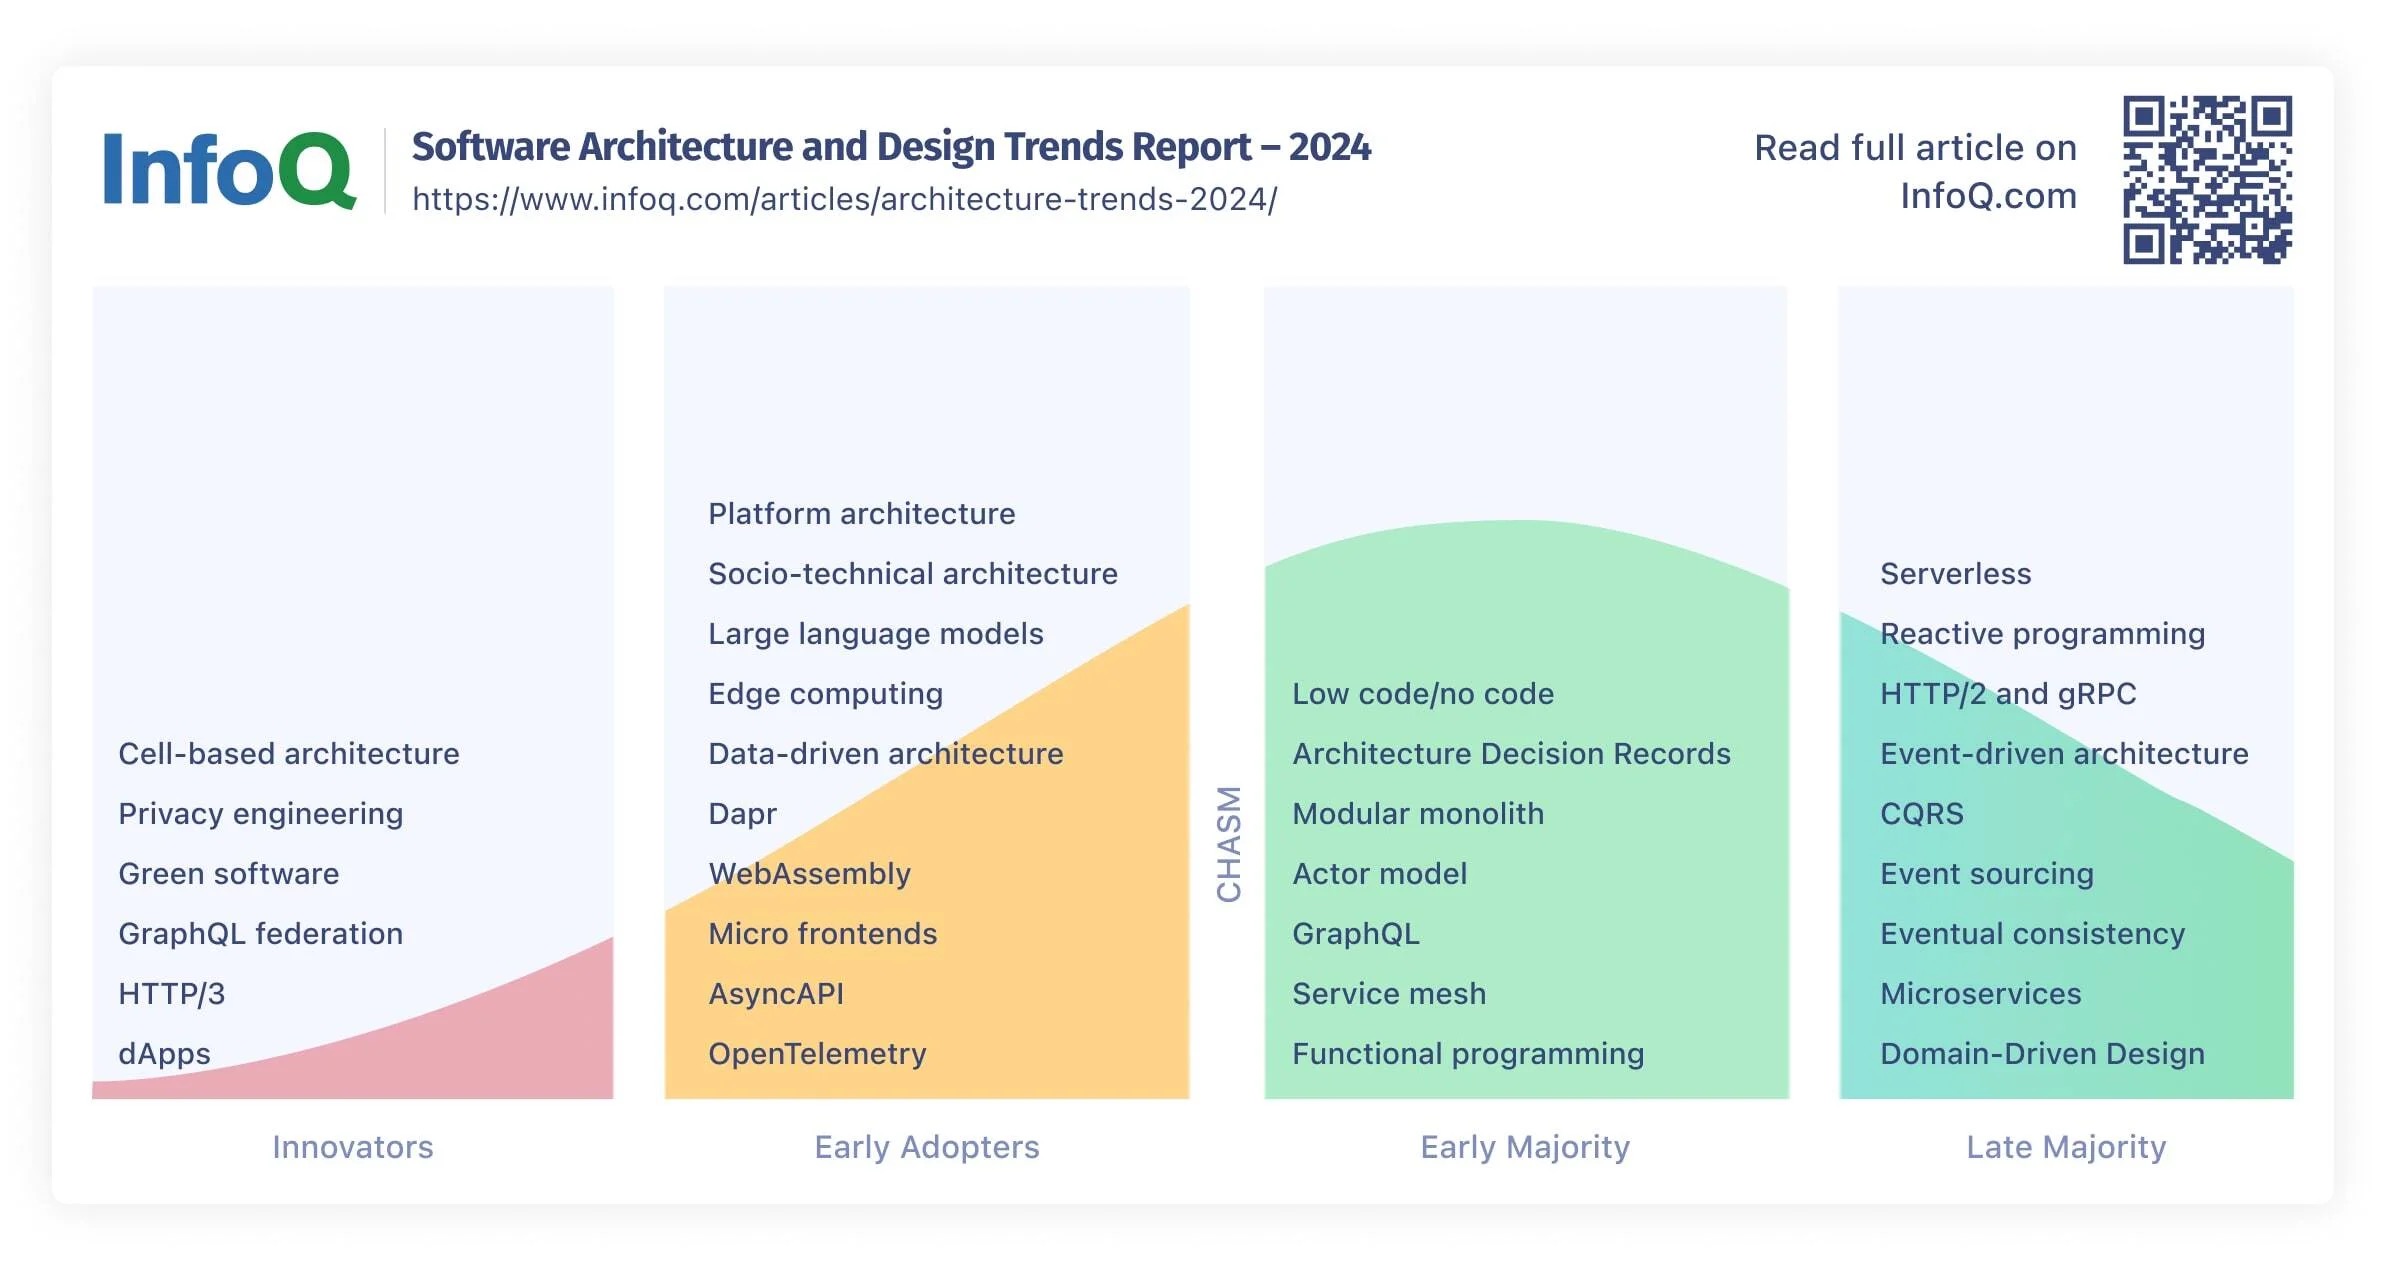 InfoQ Software Architecture and Design Trends Report